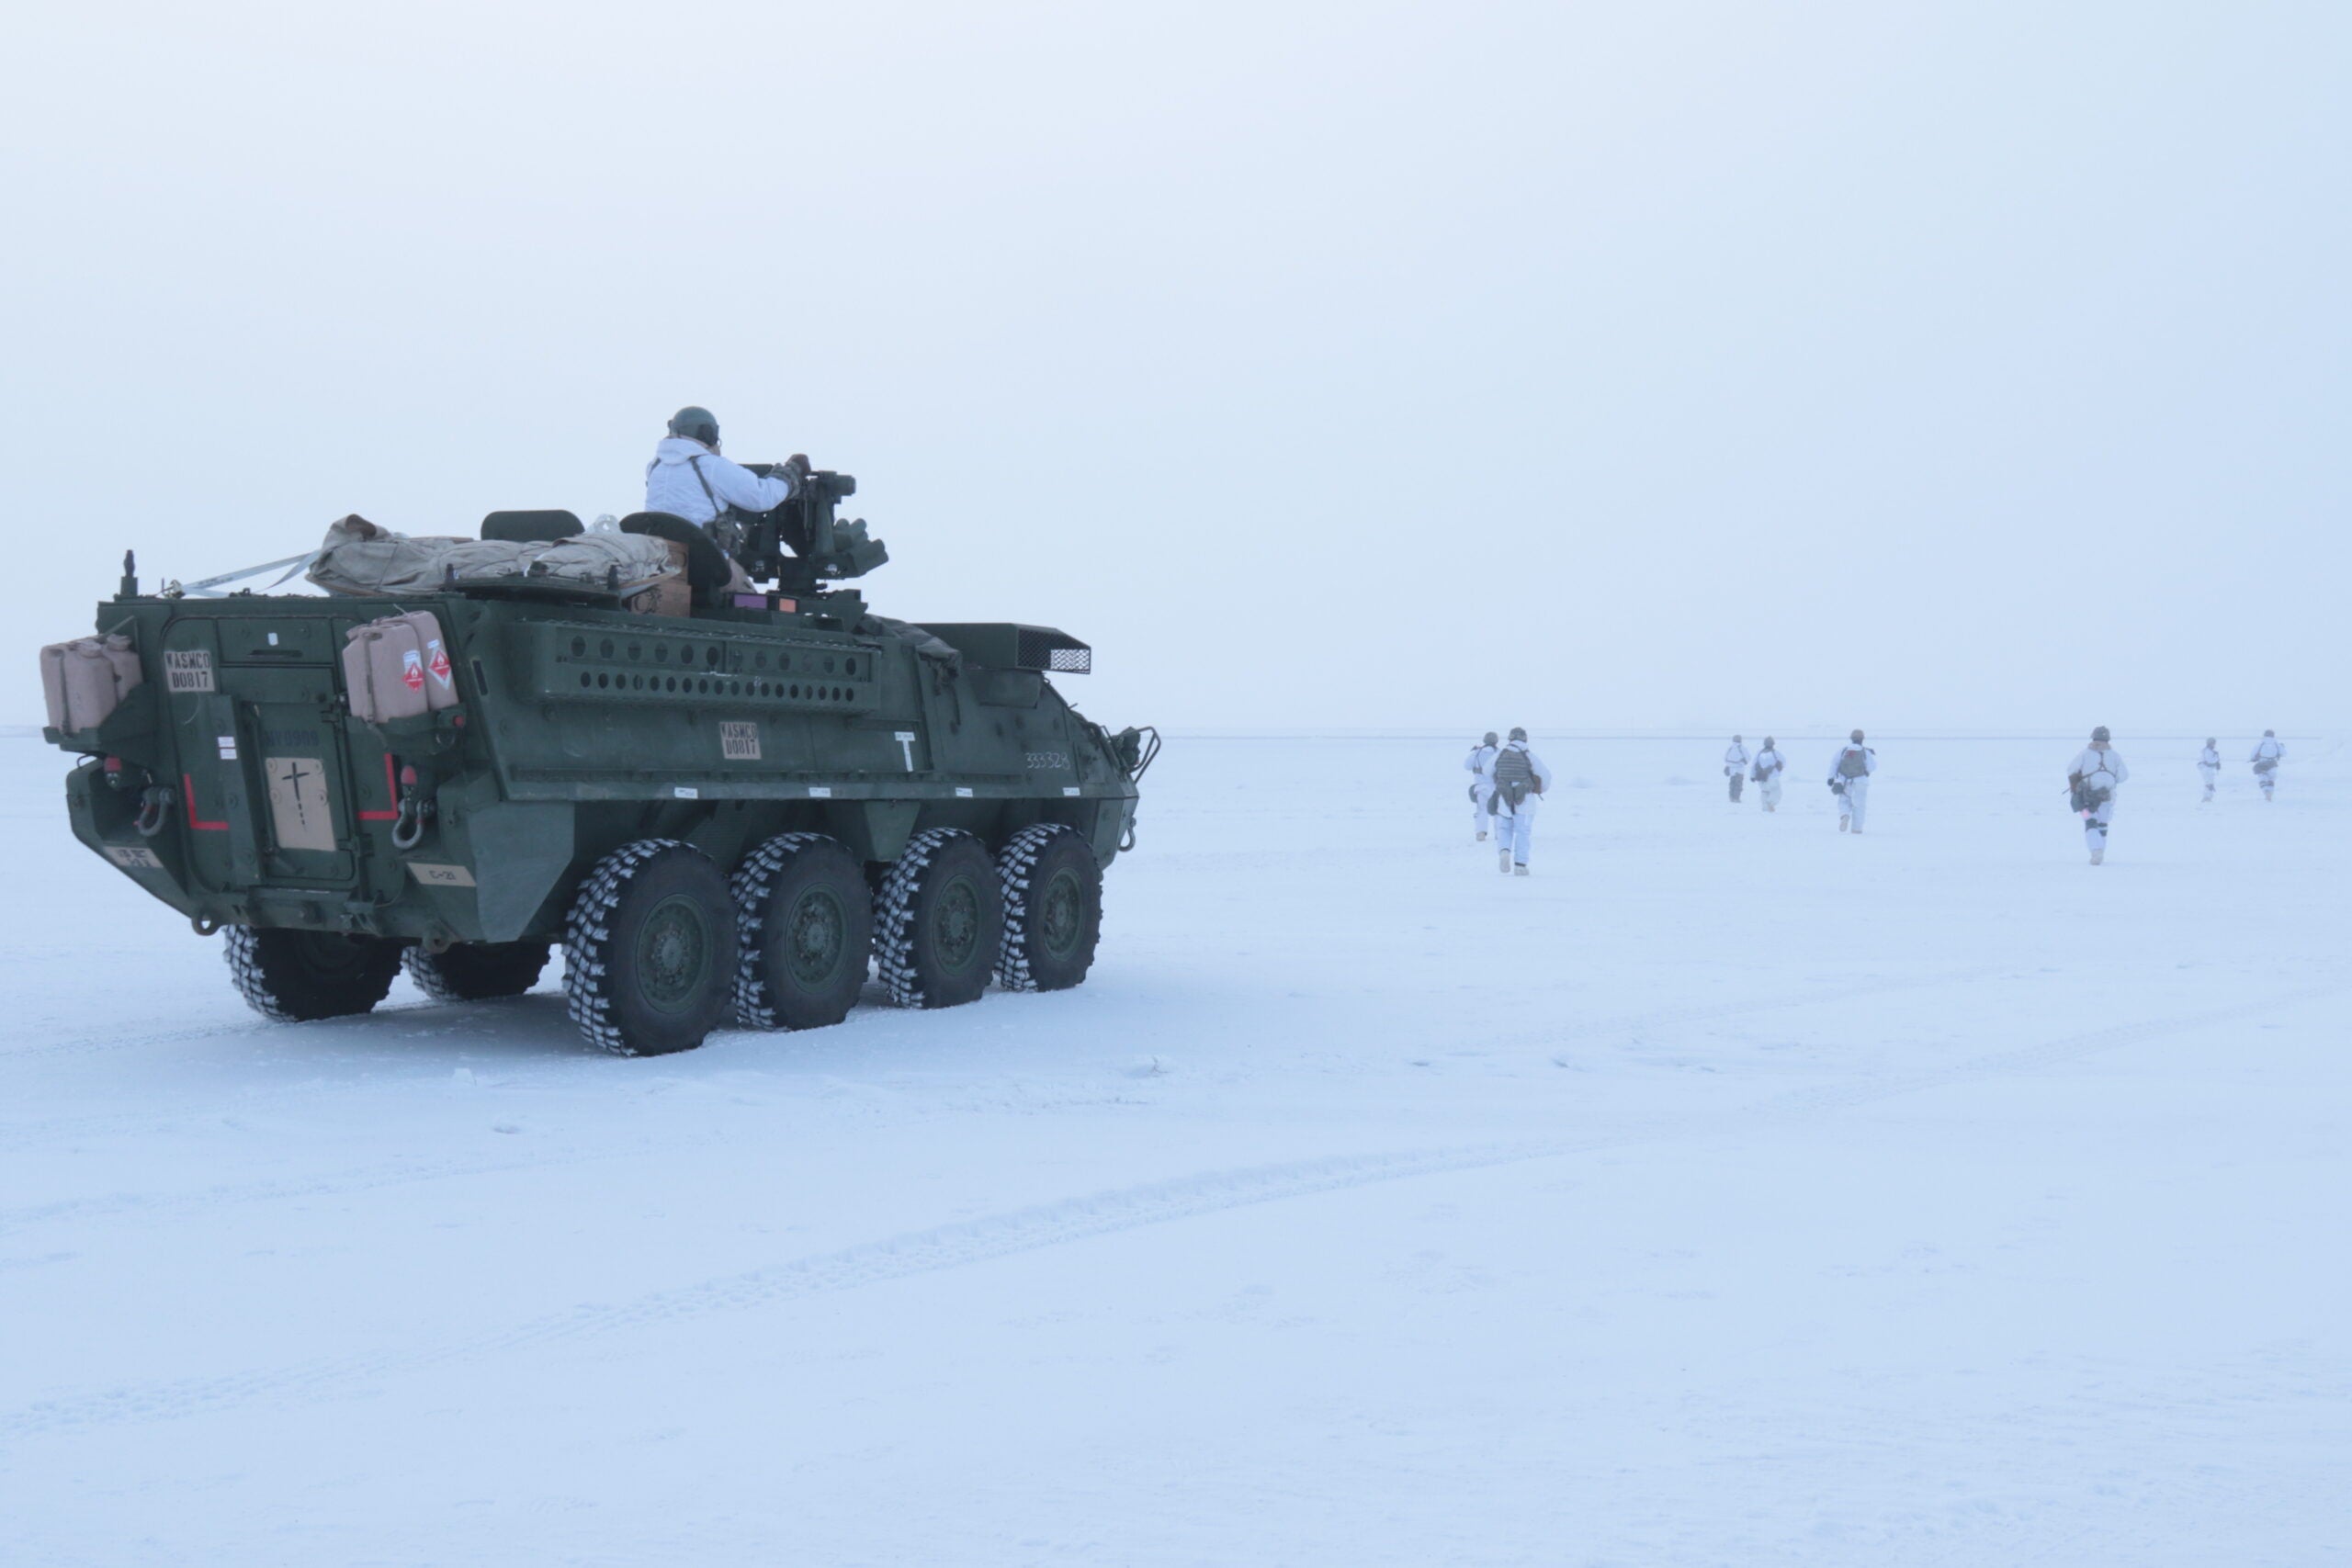 Soldiers assigned to 3rd Battalion, 21st Infantry Regiment conduct battle drills in a Stryker armored vehicle during an arctic deployment as part of the U.S. Army Alaska led exercise Arctic Edge 18 at Deadhorse, Alaska, March 13, 2018. Arctic Edge 2018 is a biennial, large-scale, joint-training exercise that prepares and tests the U.S. military’s ability to operate tactically in extreme cold-weather conditions found in Arctic environments.